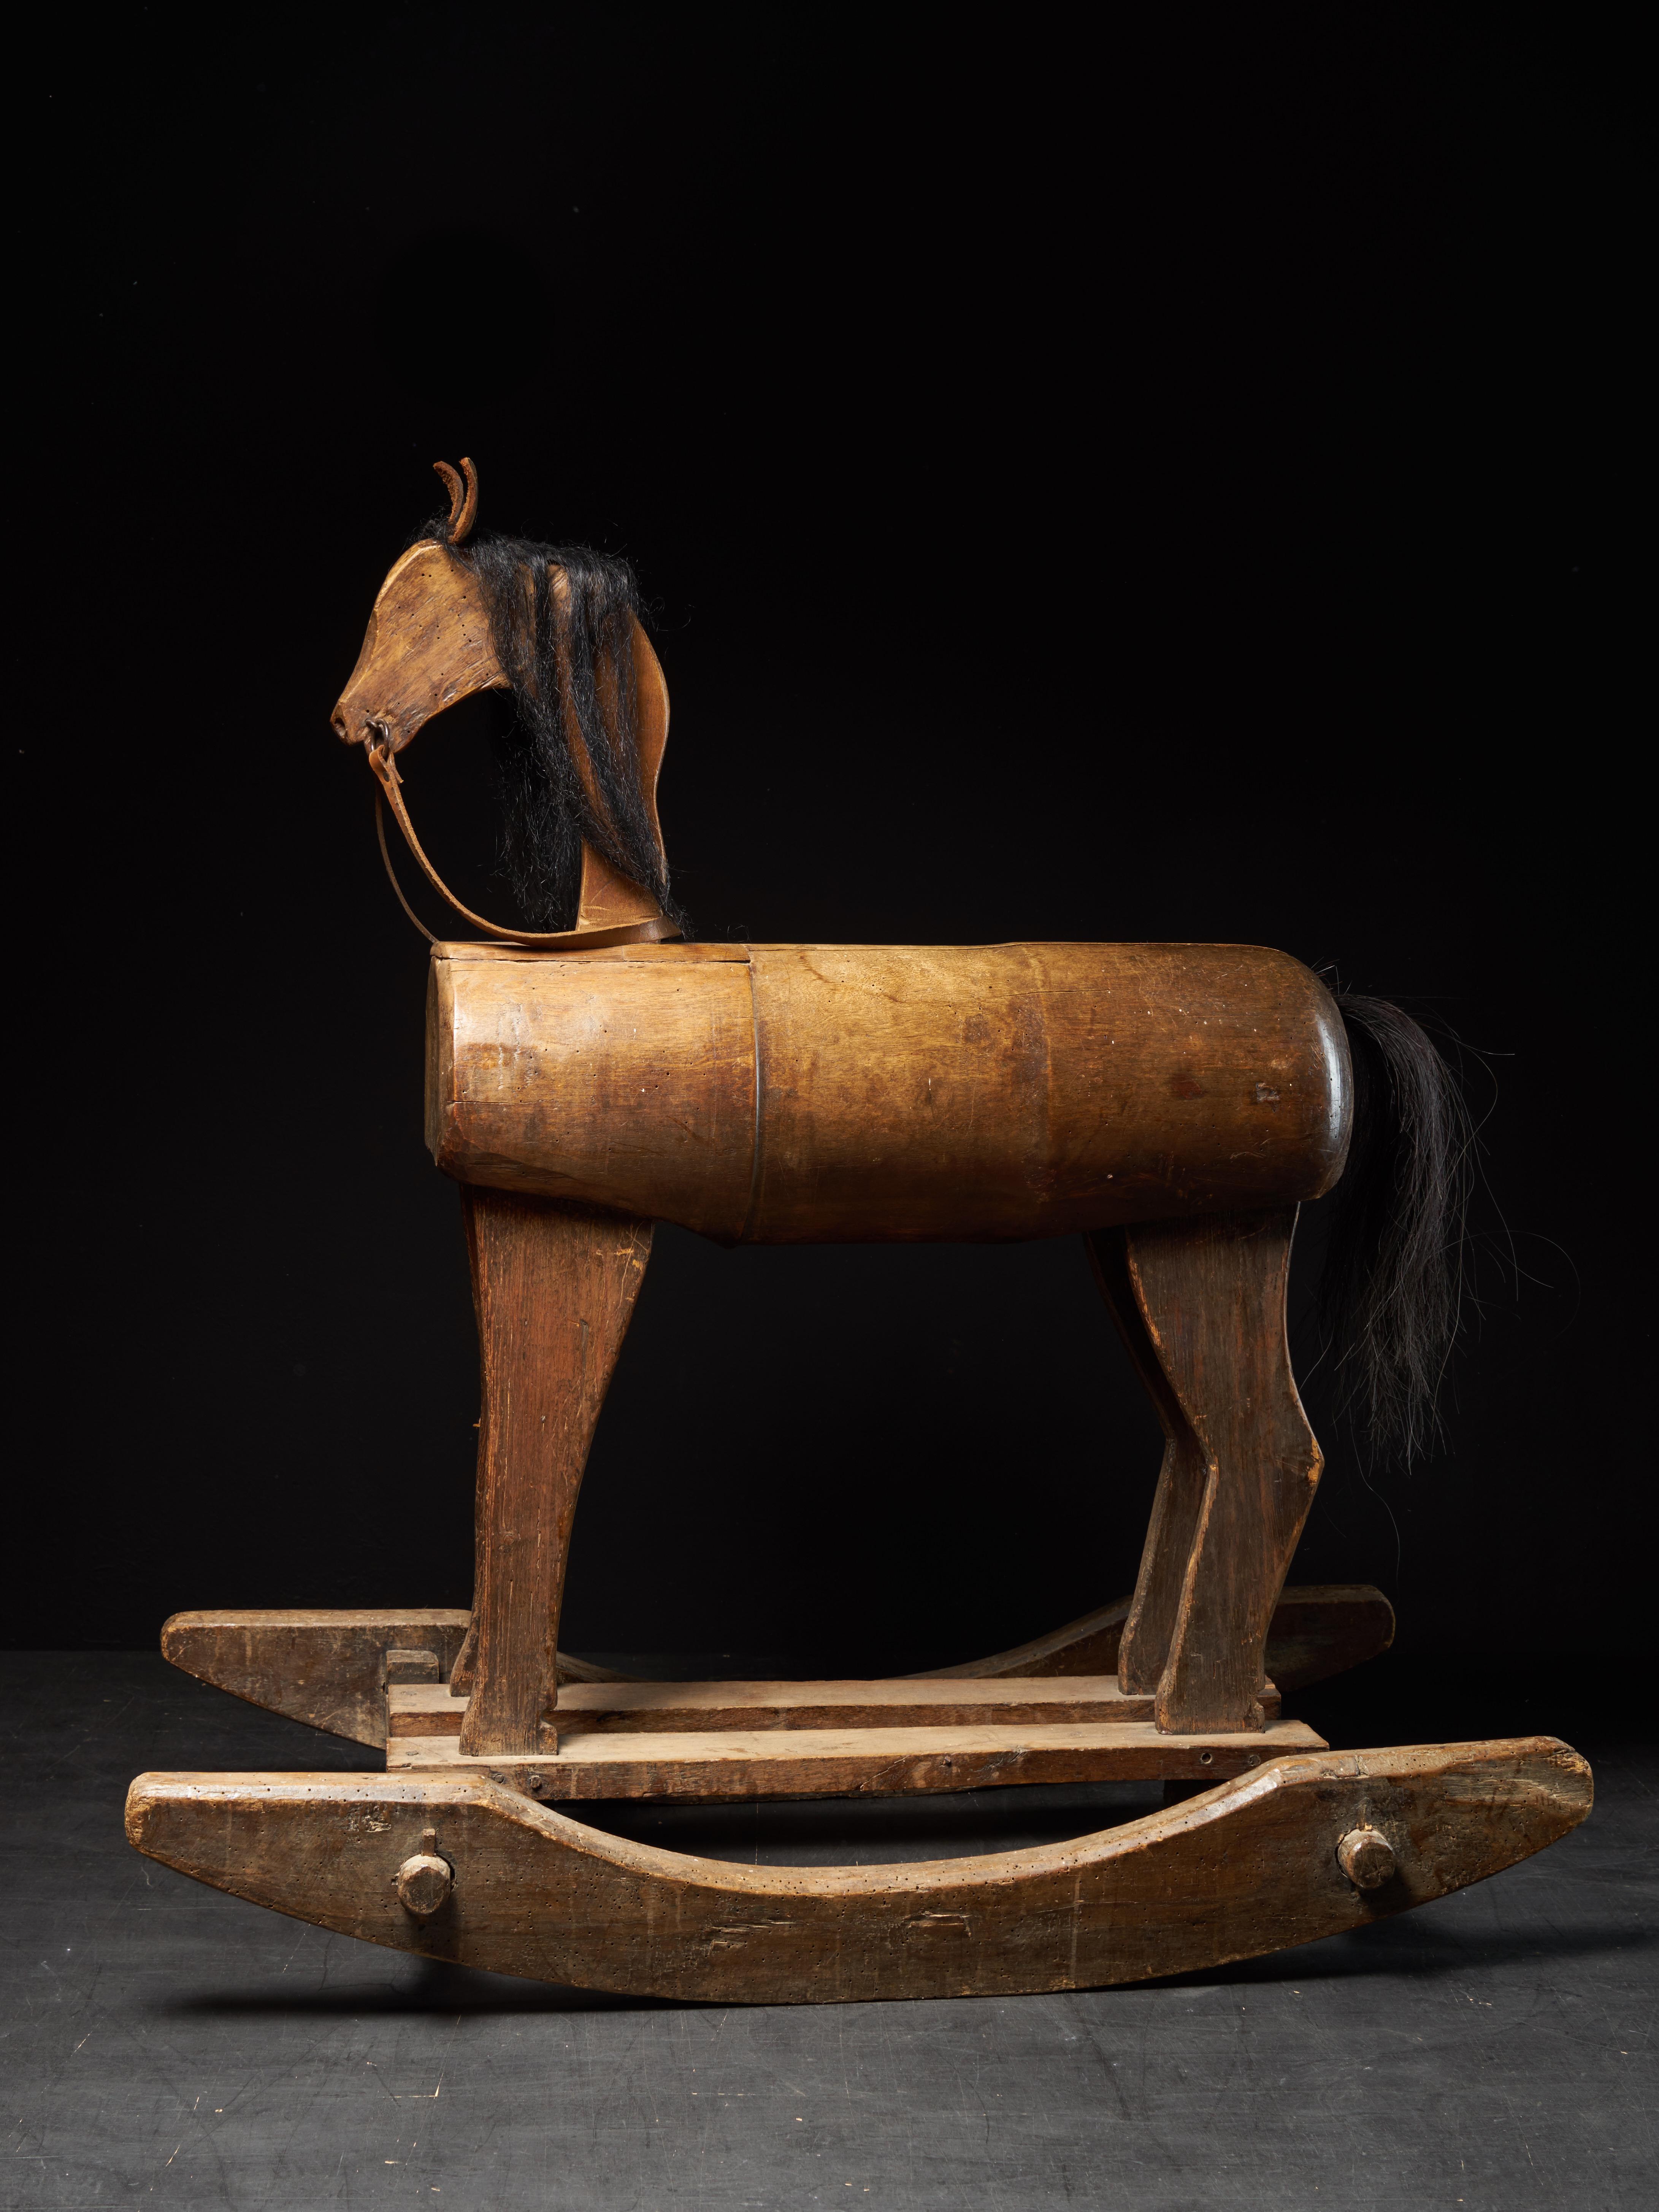 The rocking horse was made in the first half of the 20th century in the United Kingdom. The ears and the reigns are in light brown leather. The main and the tail of the horse are made of real hair and the body, the legs and the bottom part are made